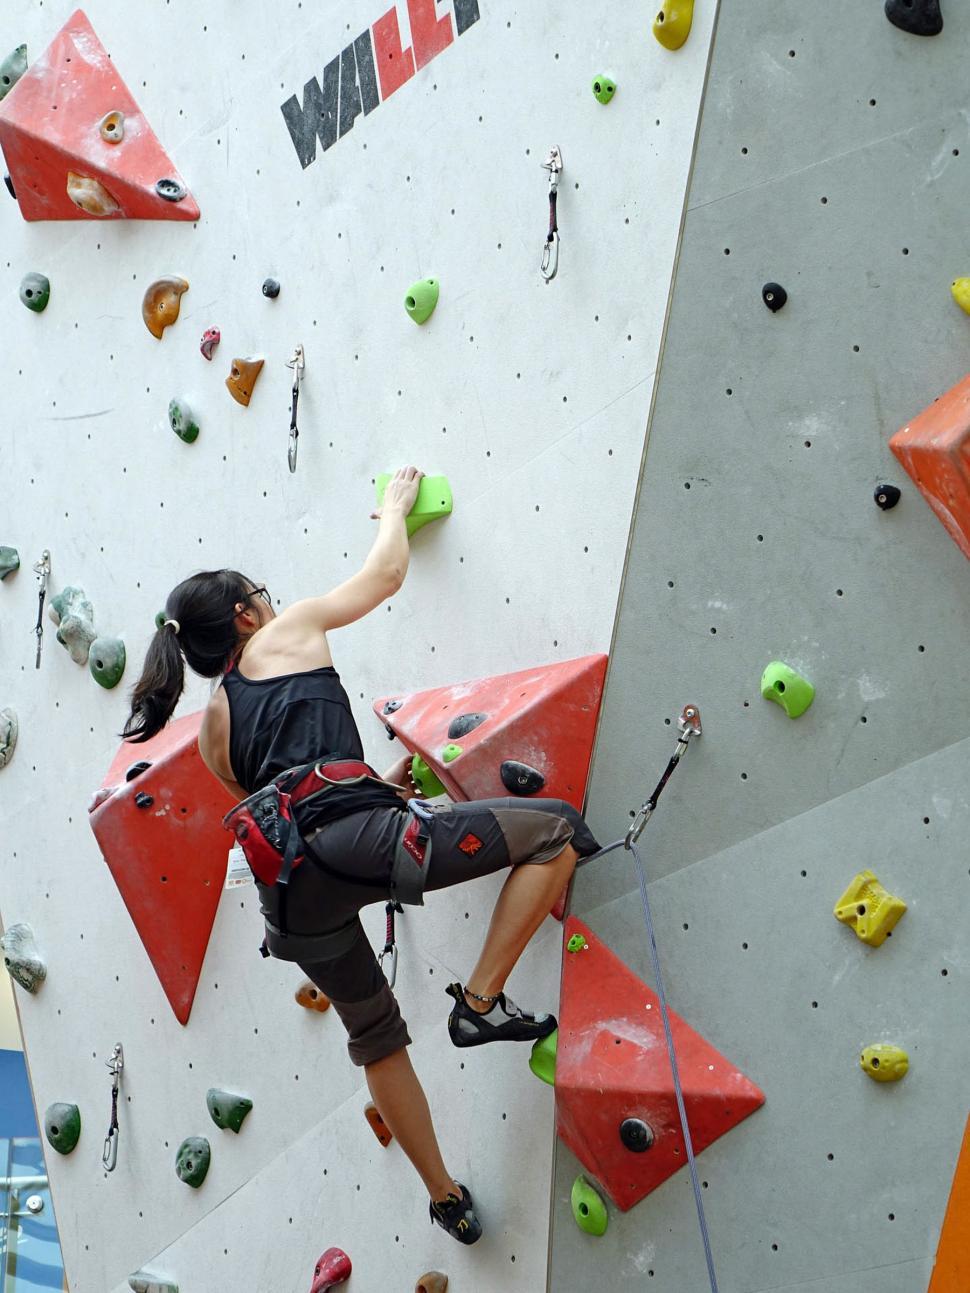 Free Image of Skilled sport climber 